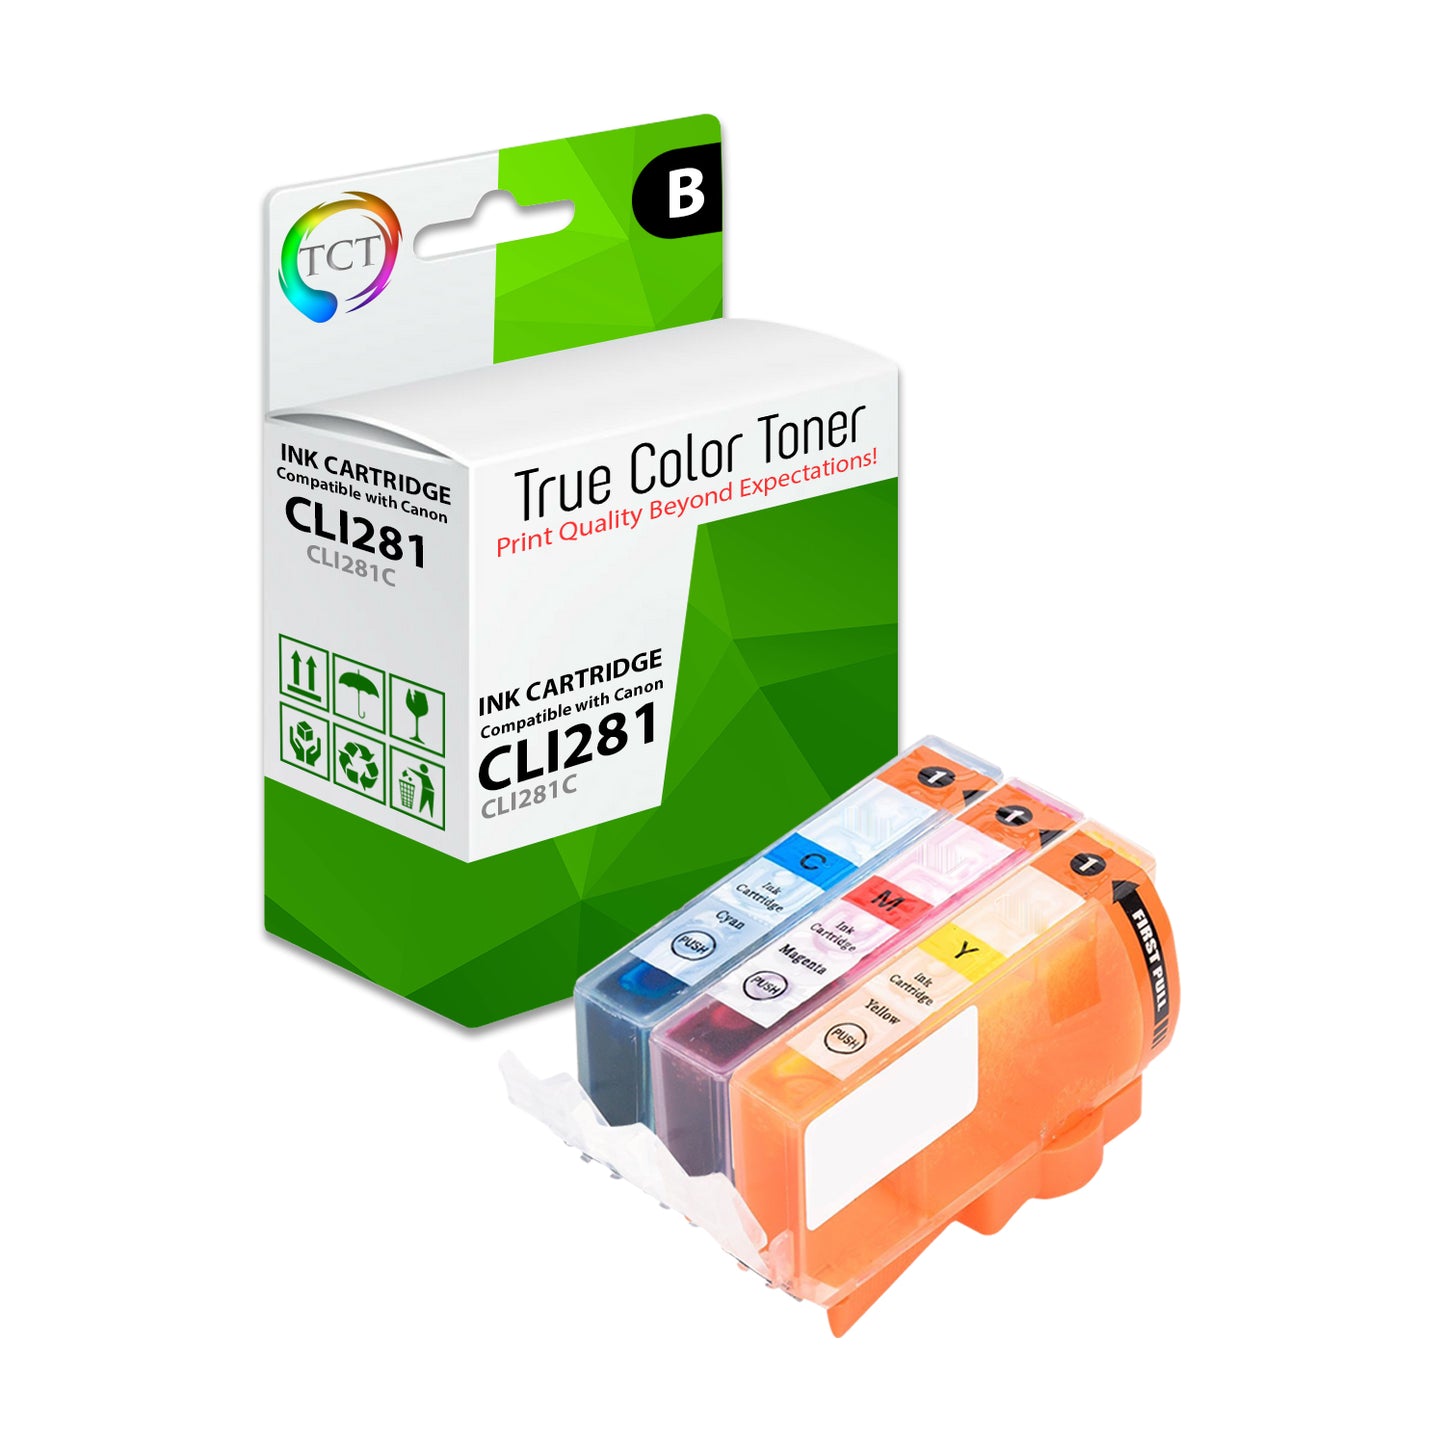 TCT Compatible Ink Cartridge Replacement for the Canon CLI-281 Series - 3 Pack (C, M, Y)